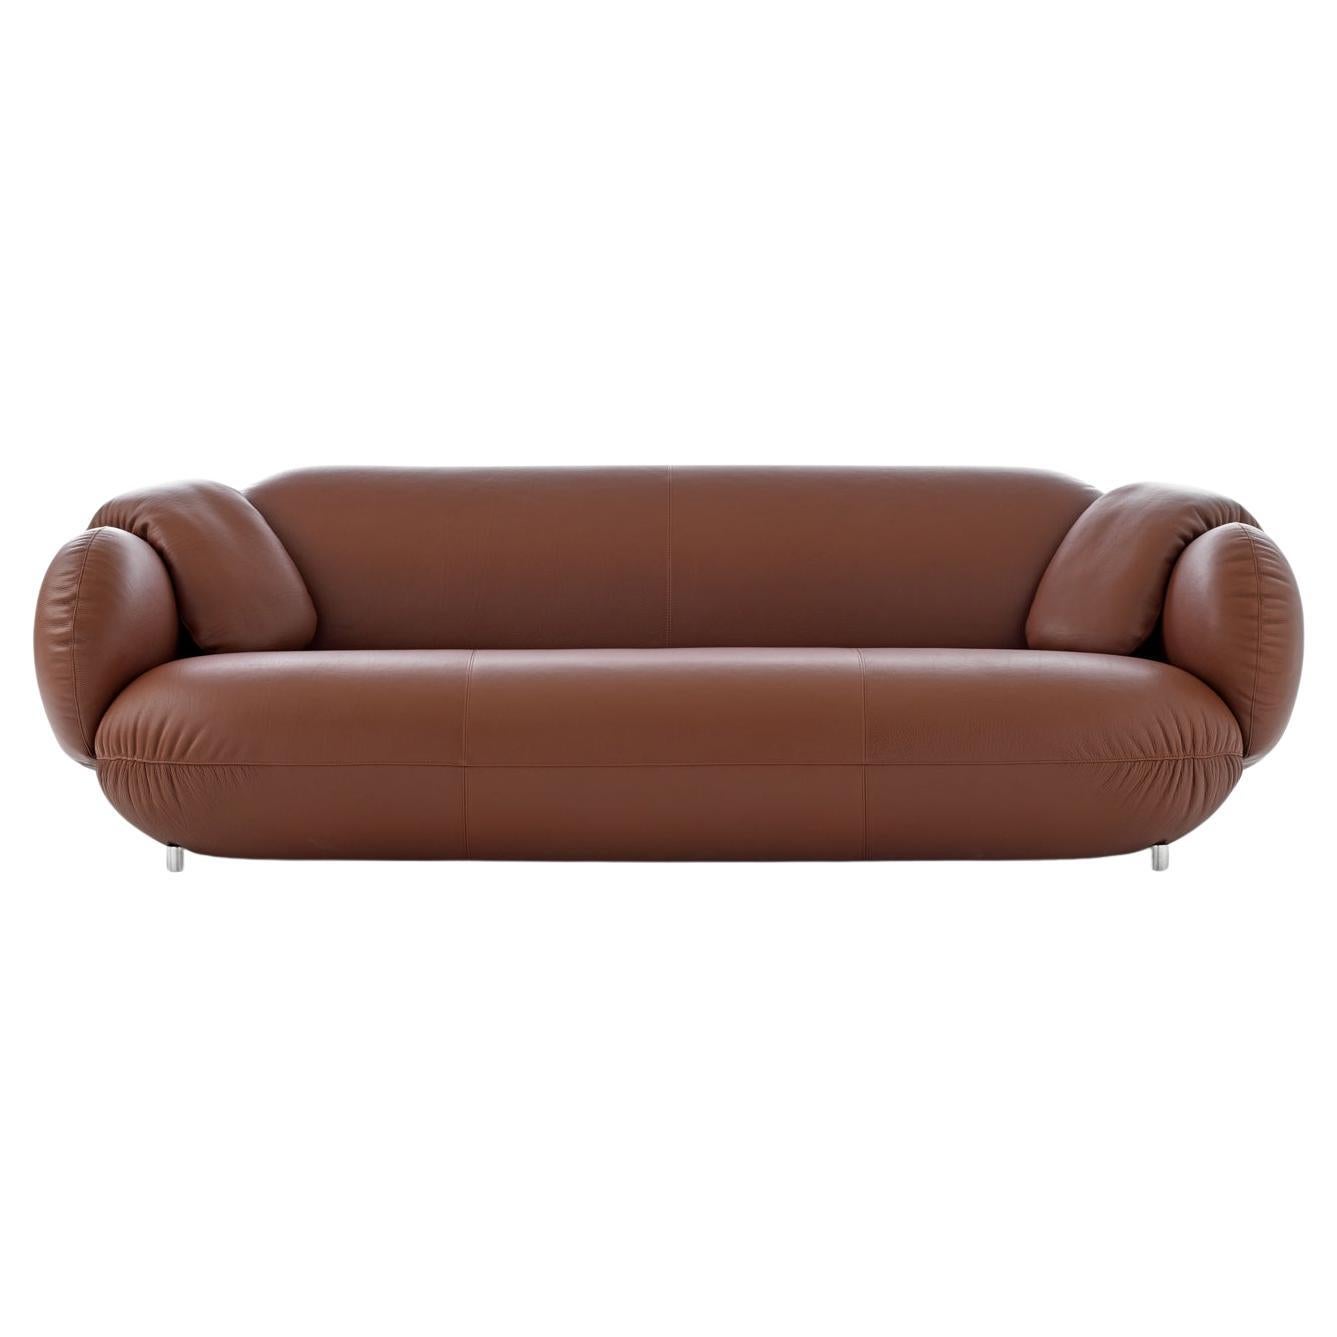 Light Brown Pulla 3-Seater Sofa Designed By Studio Truly Truly for Leolux